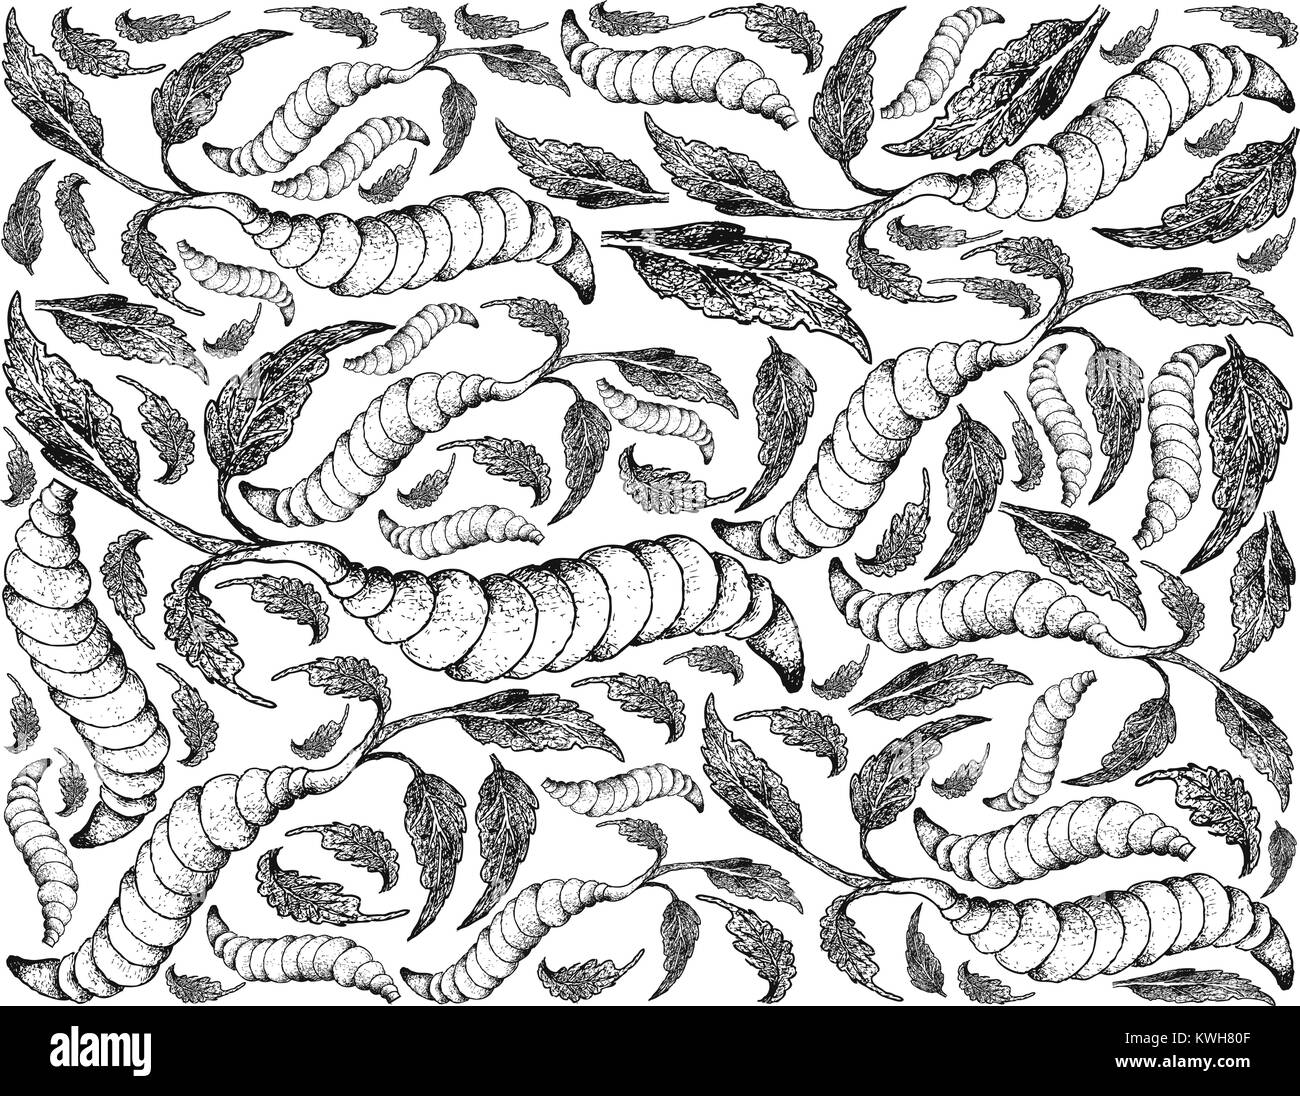 Root and Tuberous Vegetables, Illustration Hand Drawn Sketch of Fresh Chinese Artichoke or Stachys Affinis Plant Isolated on White Background. Stock Vector